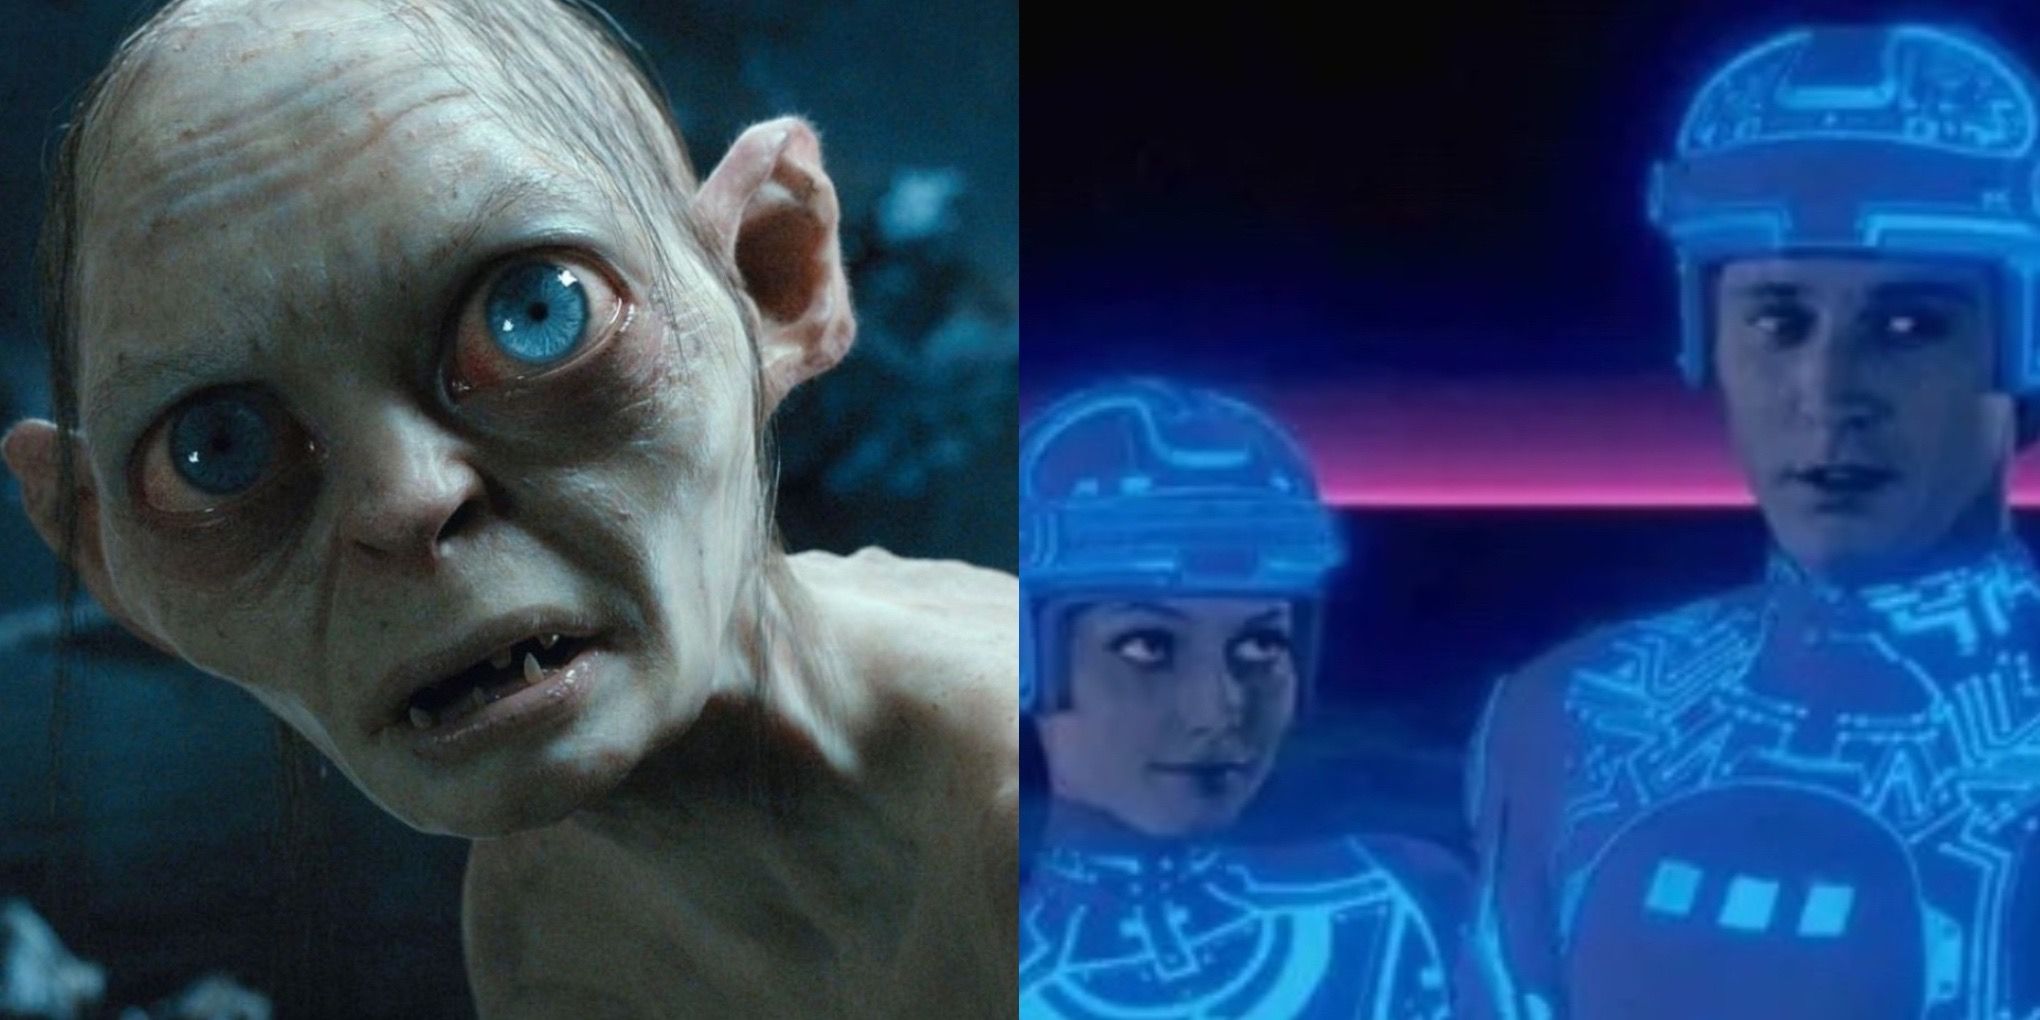 Badly Aged CGI Cover Image The Hobbit and Tron